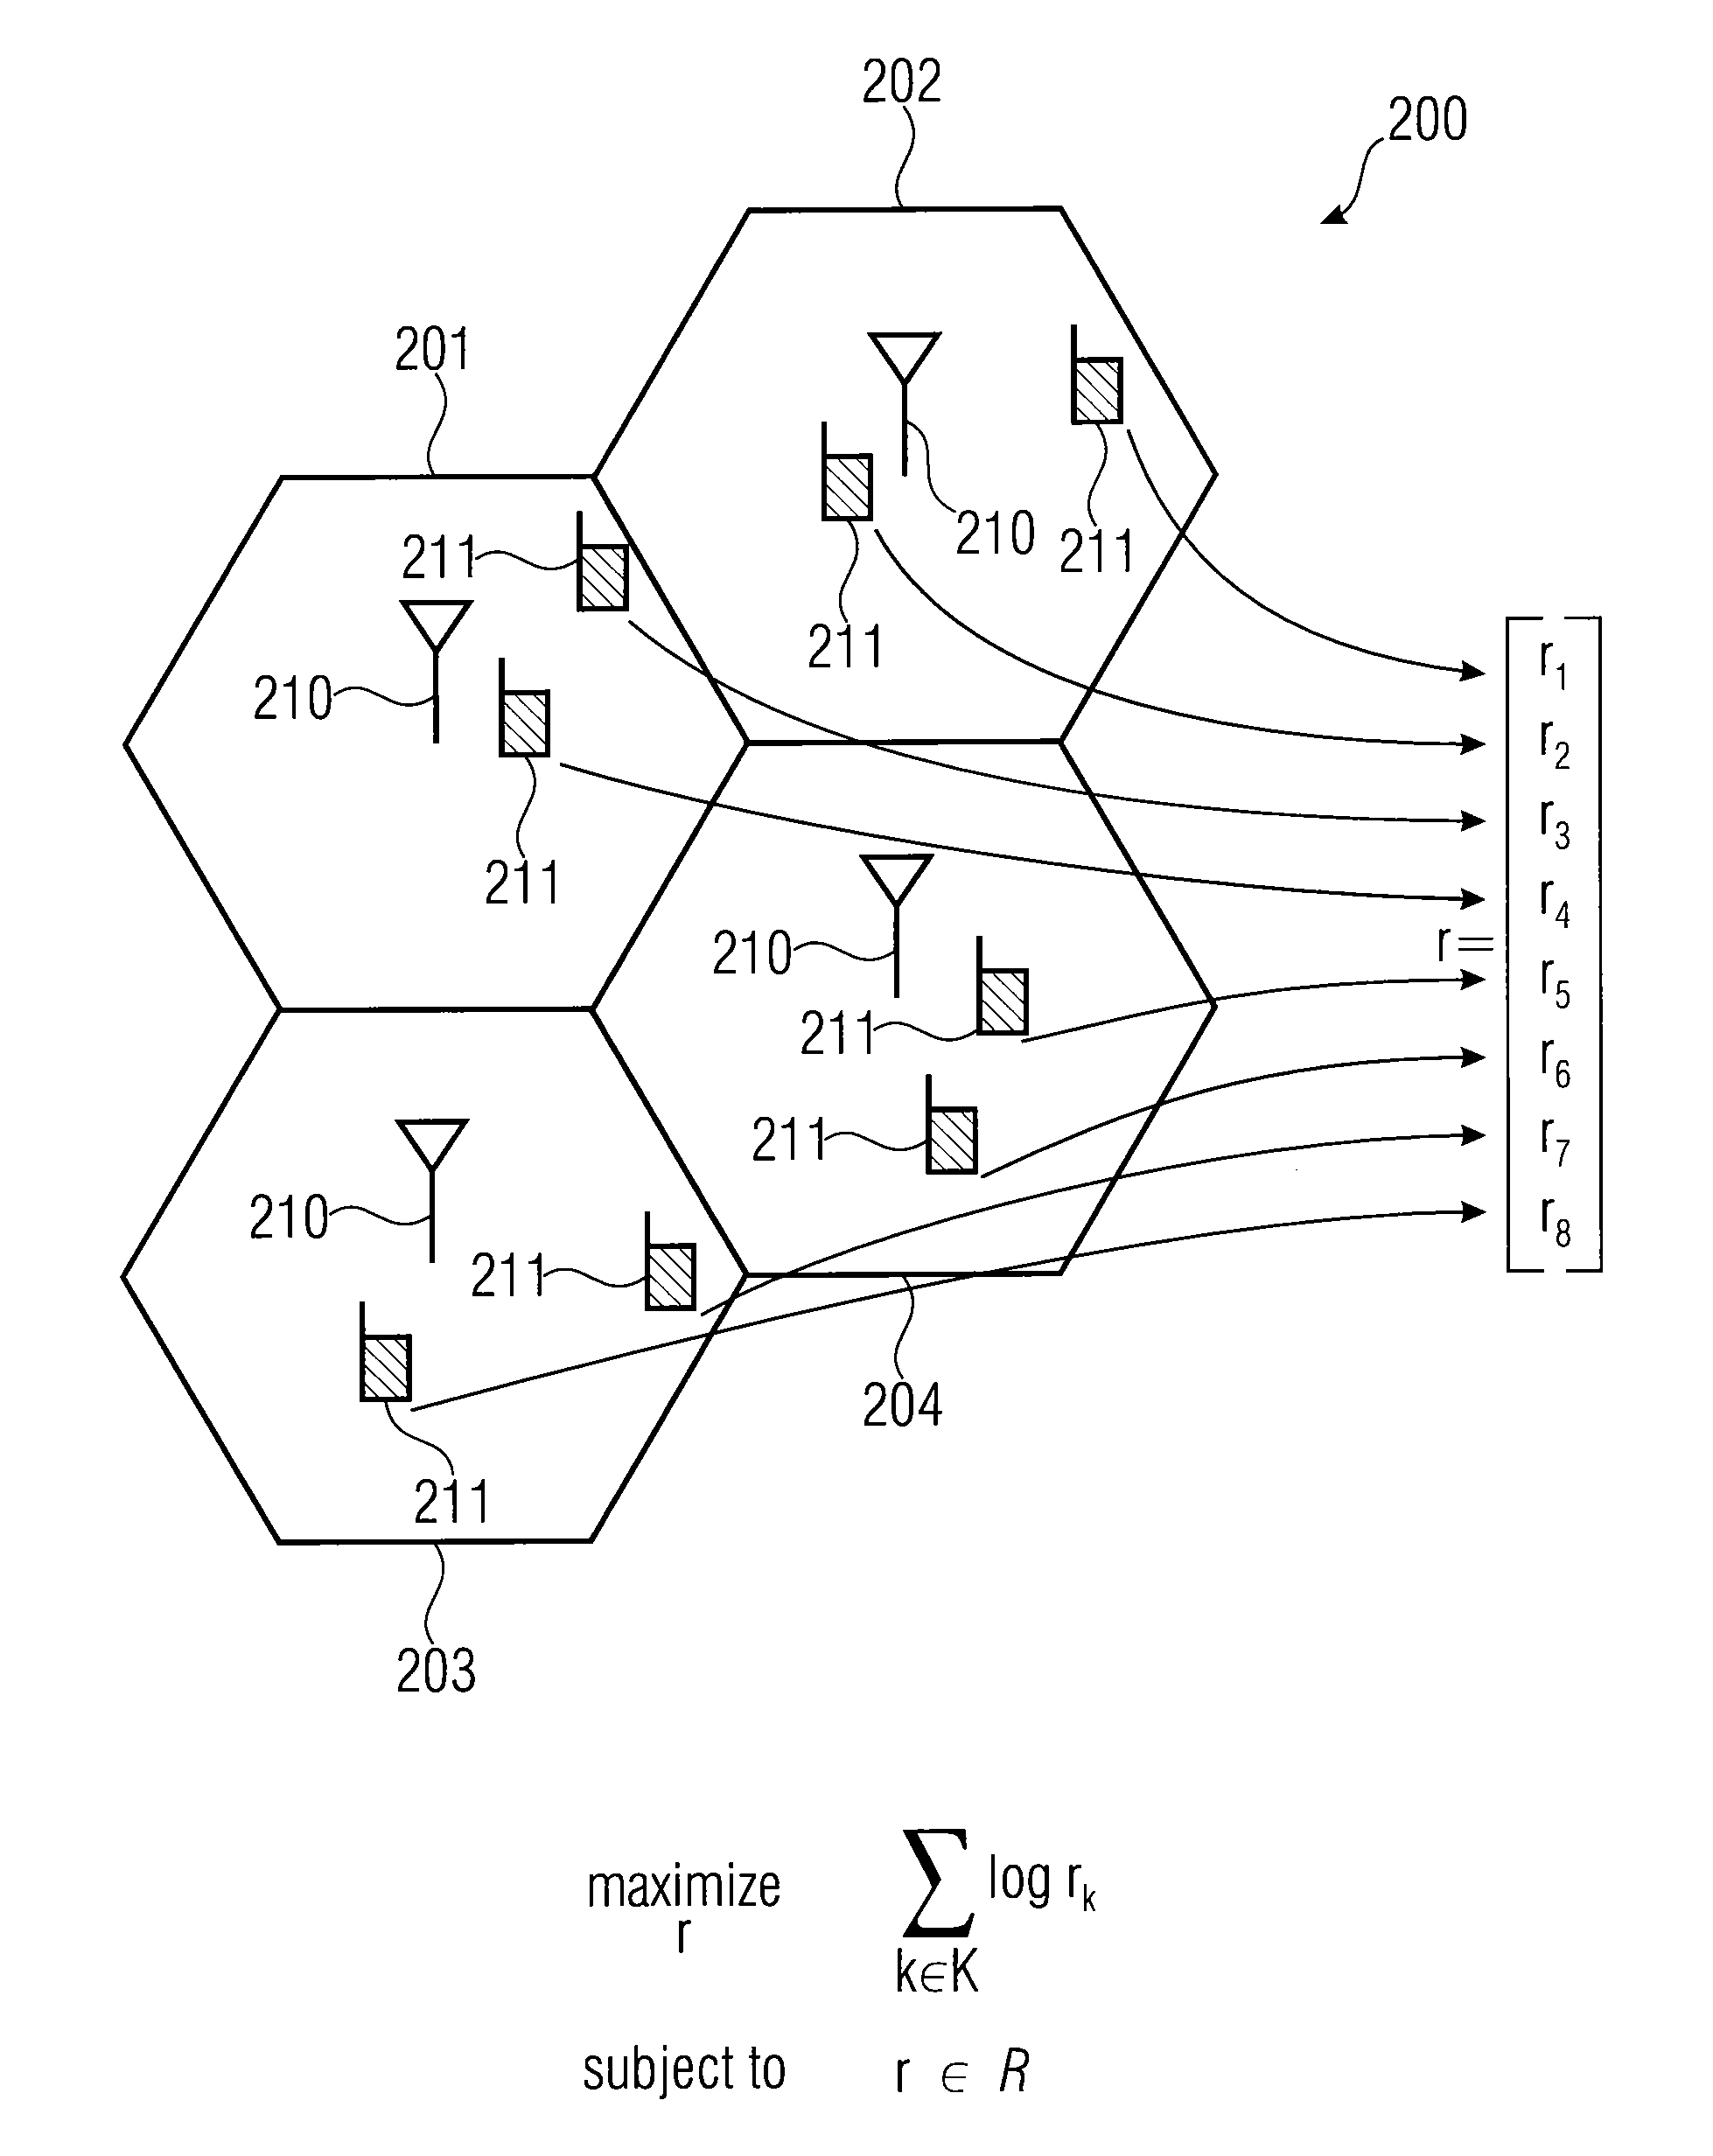 Apparatus and method for allocating resources to nodes in a communication system using an update of iteration resource weights